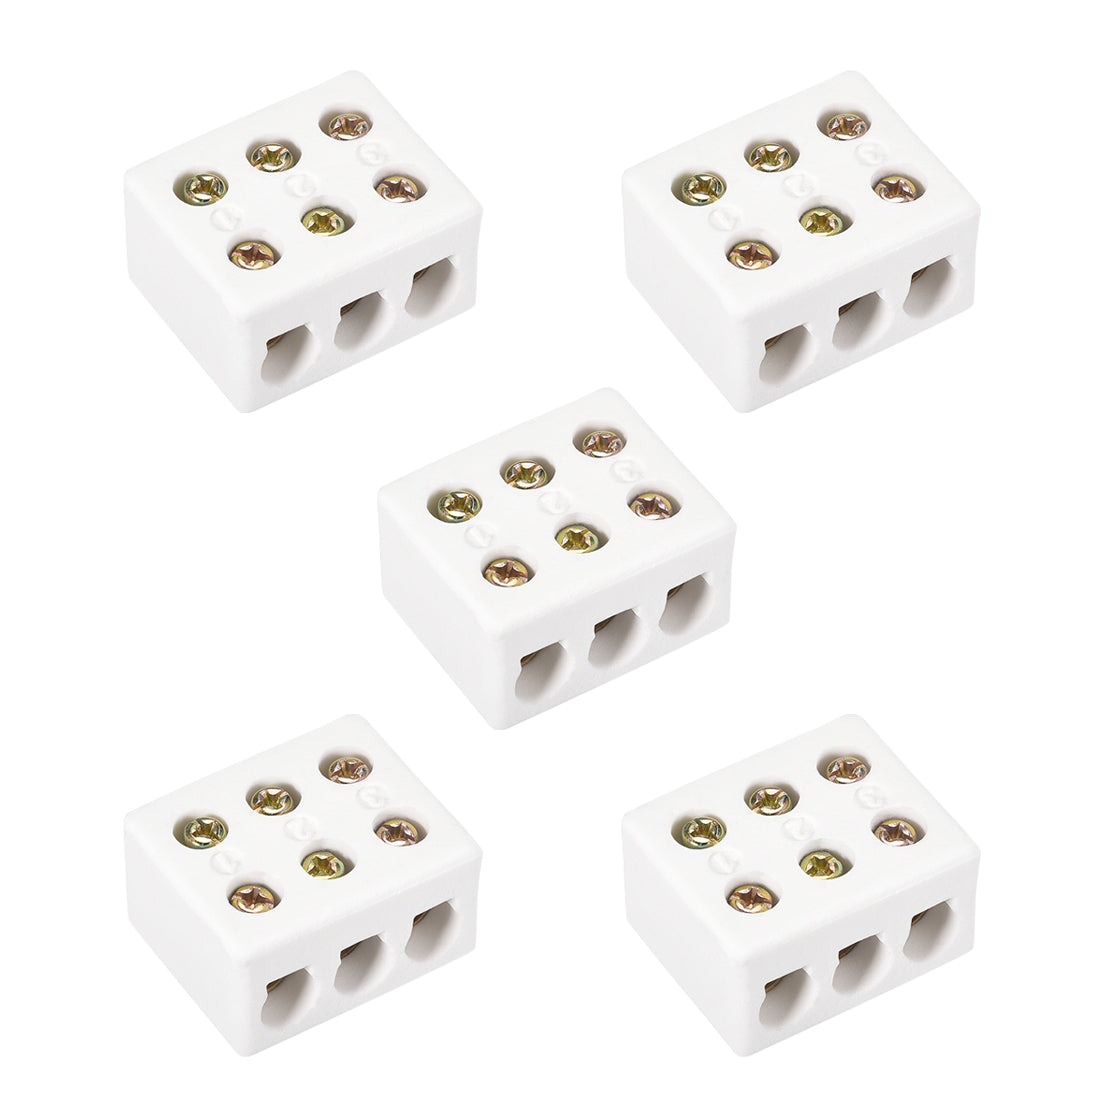 uxcell Uxcell 3 Way Ceramics Terminal Blocks High Temp Porcelain Ceramic Connectors 36x30x20mm for Electrical Wire Cable 5 Pcs